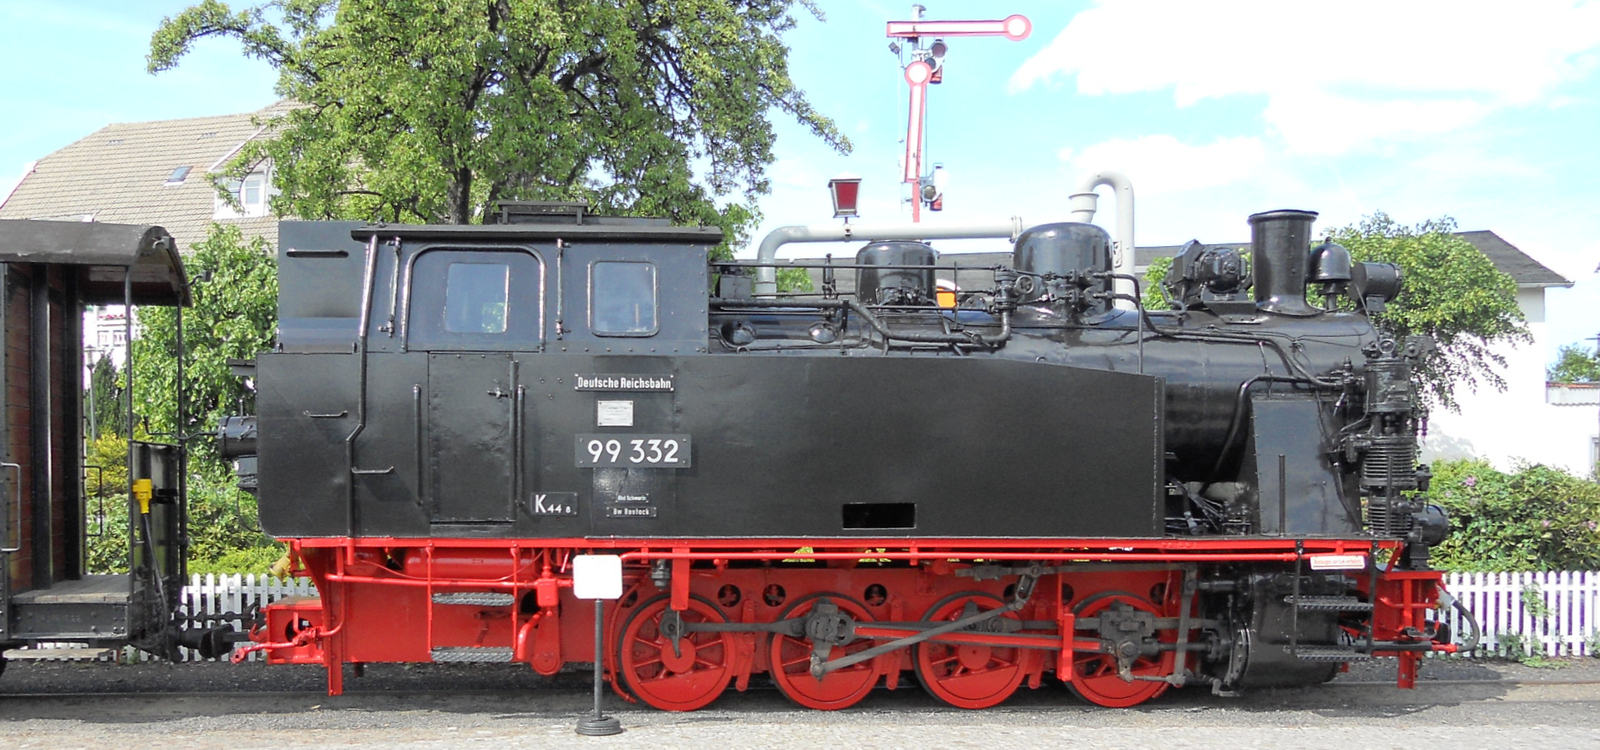 99 332 in May 2011 in the Molli Museum in Kühlungsborn